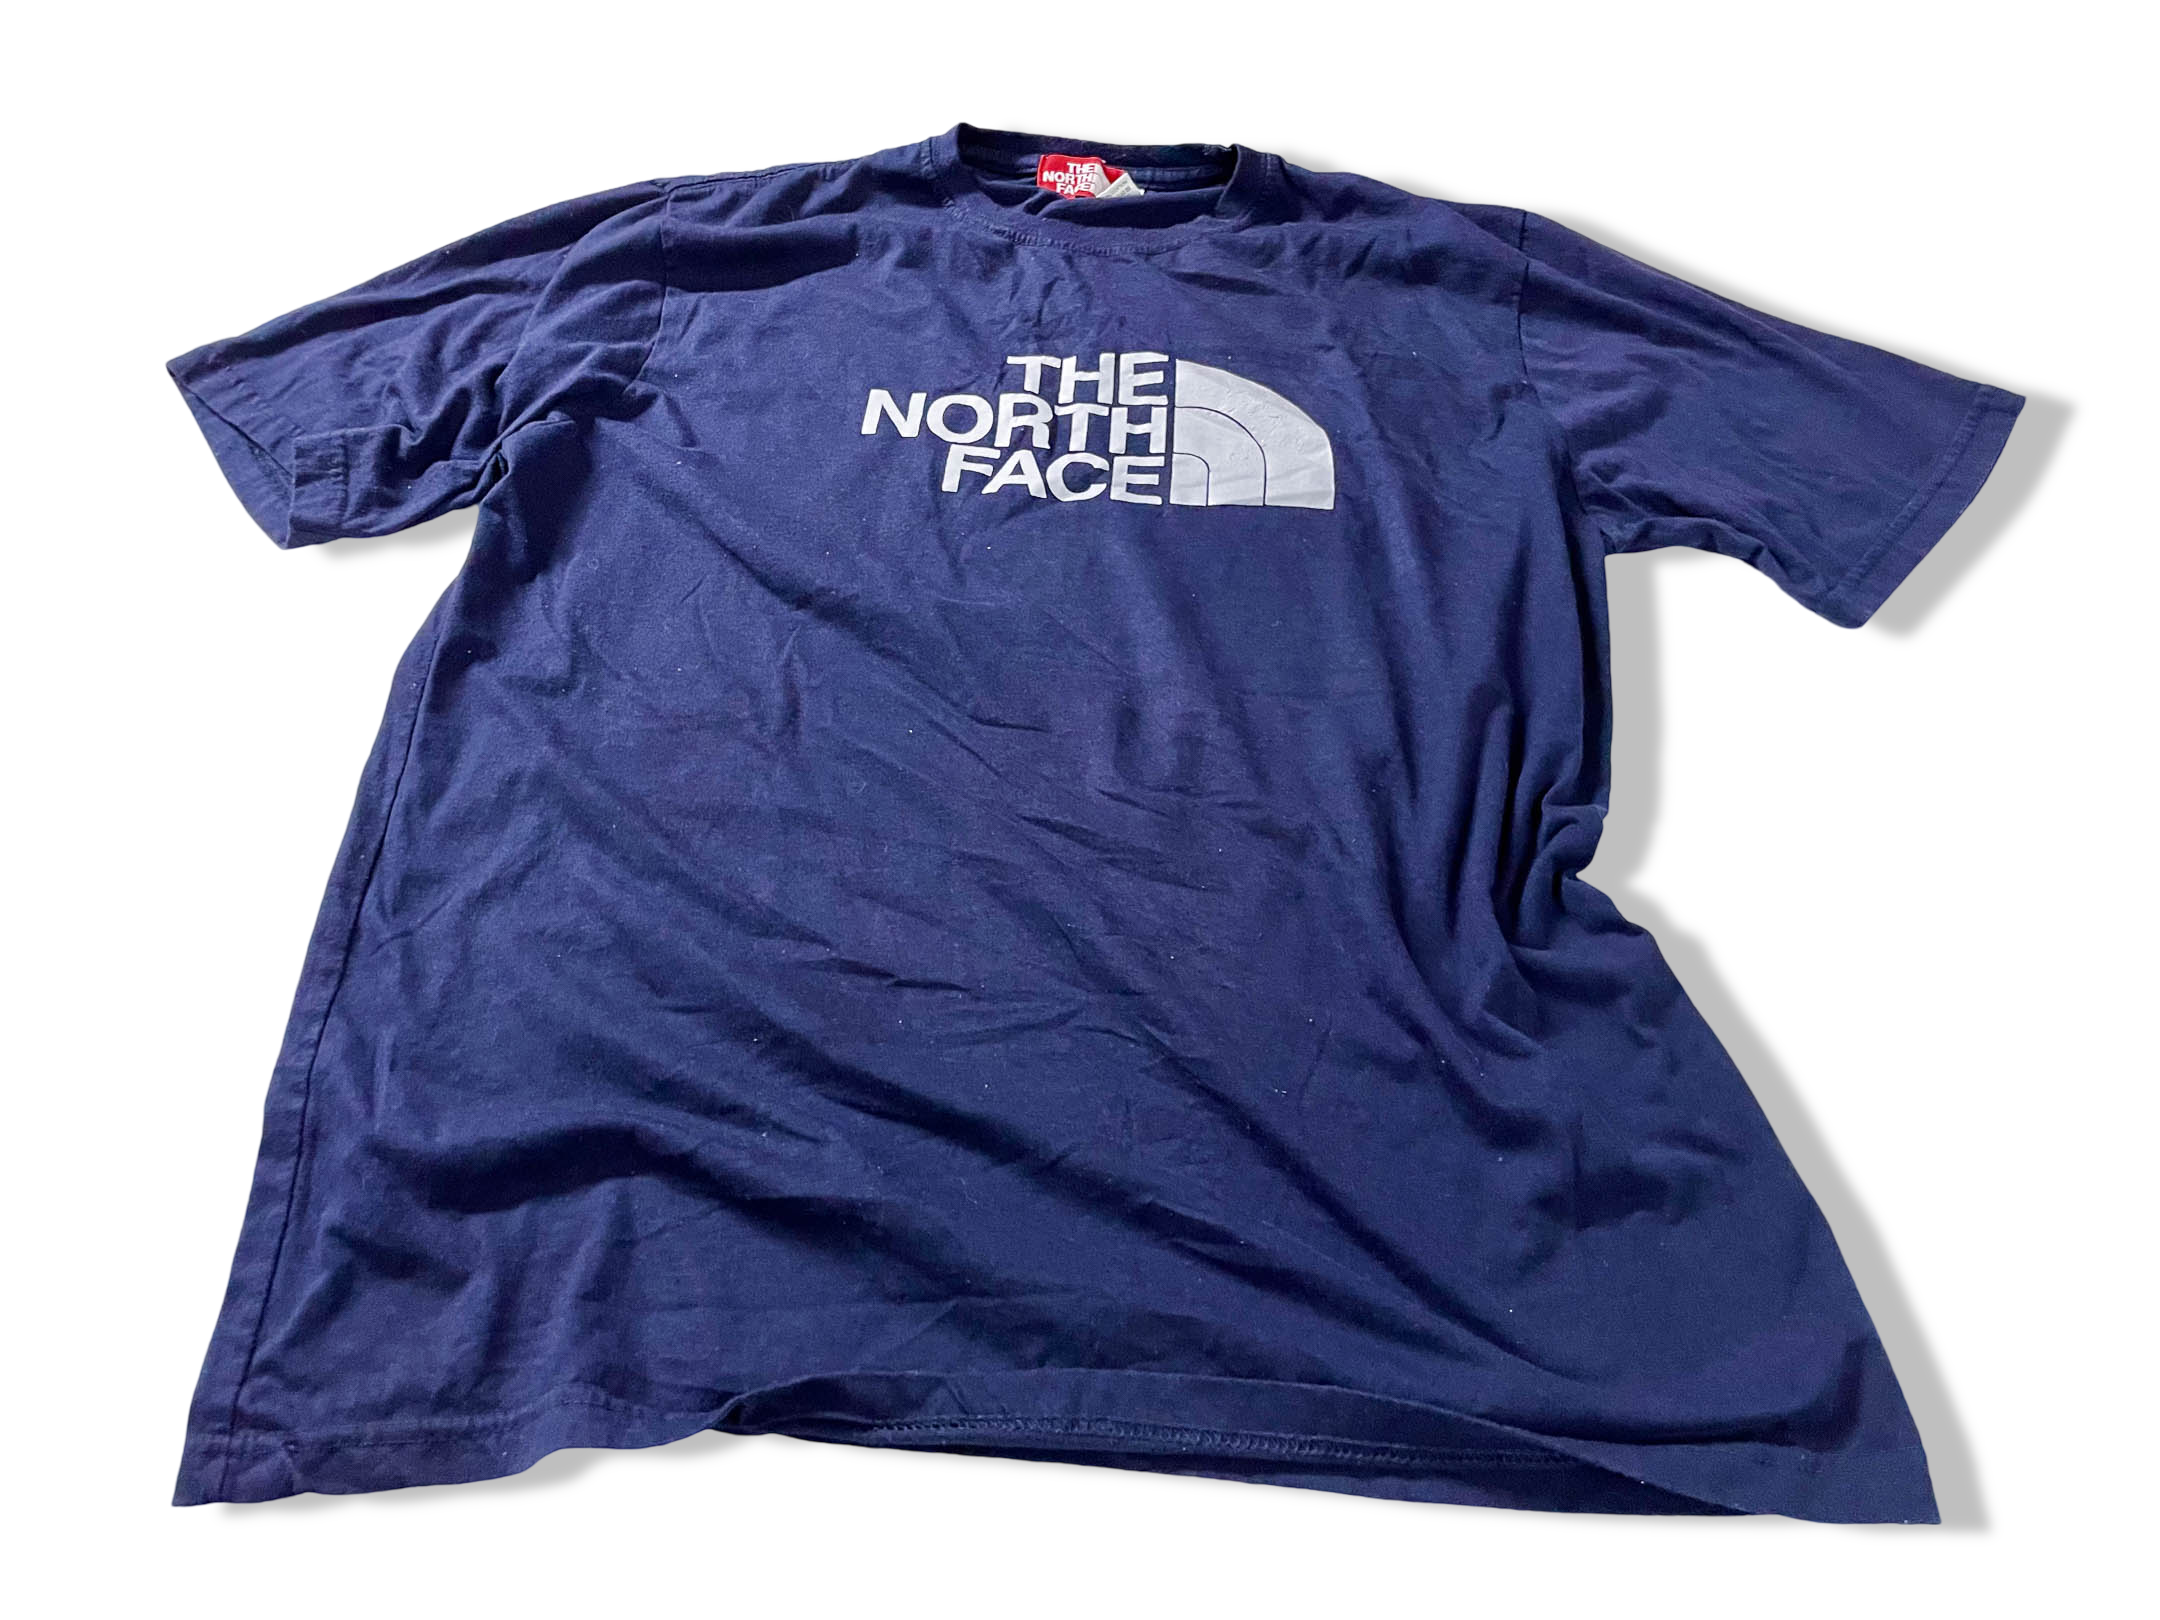 Vintage men's The north face graphics Navy tees in XL|L28 W23| SKU 4122